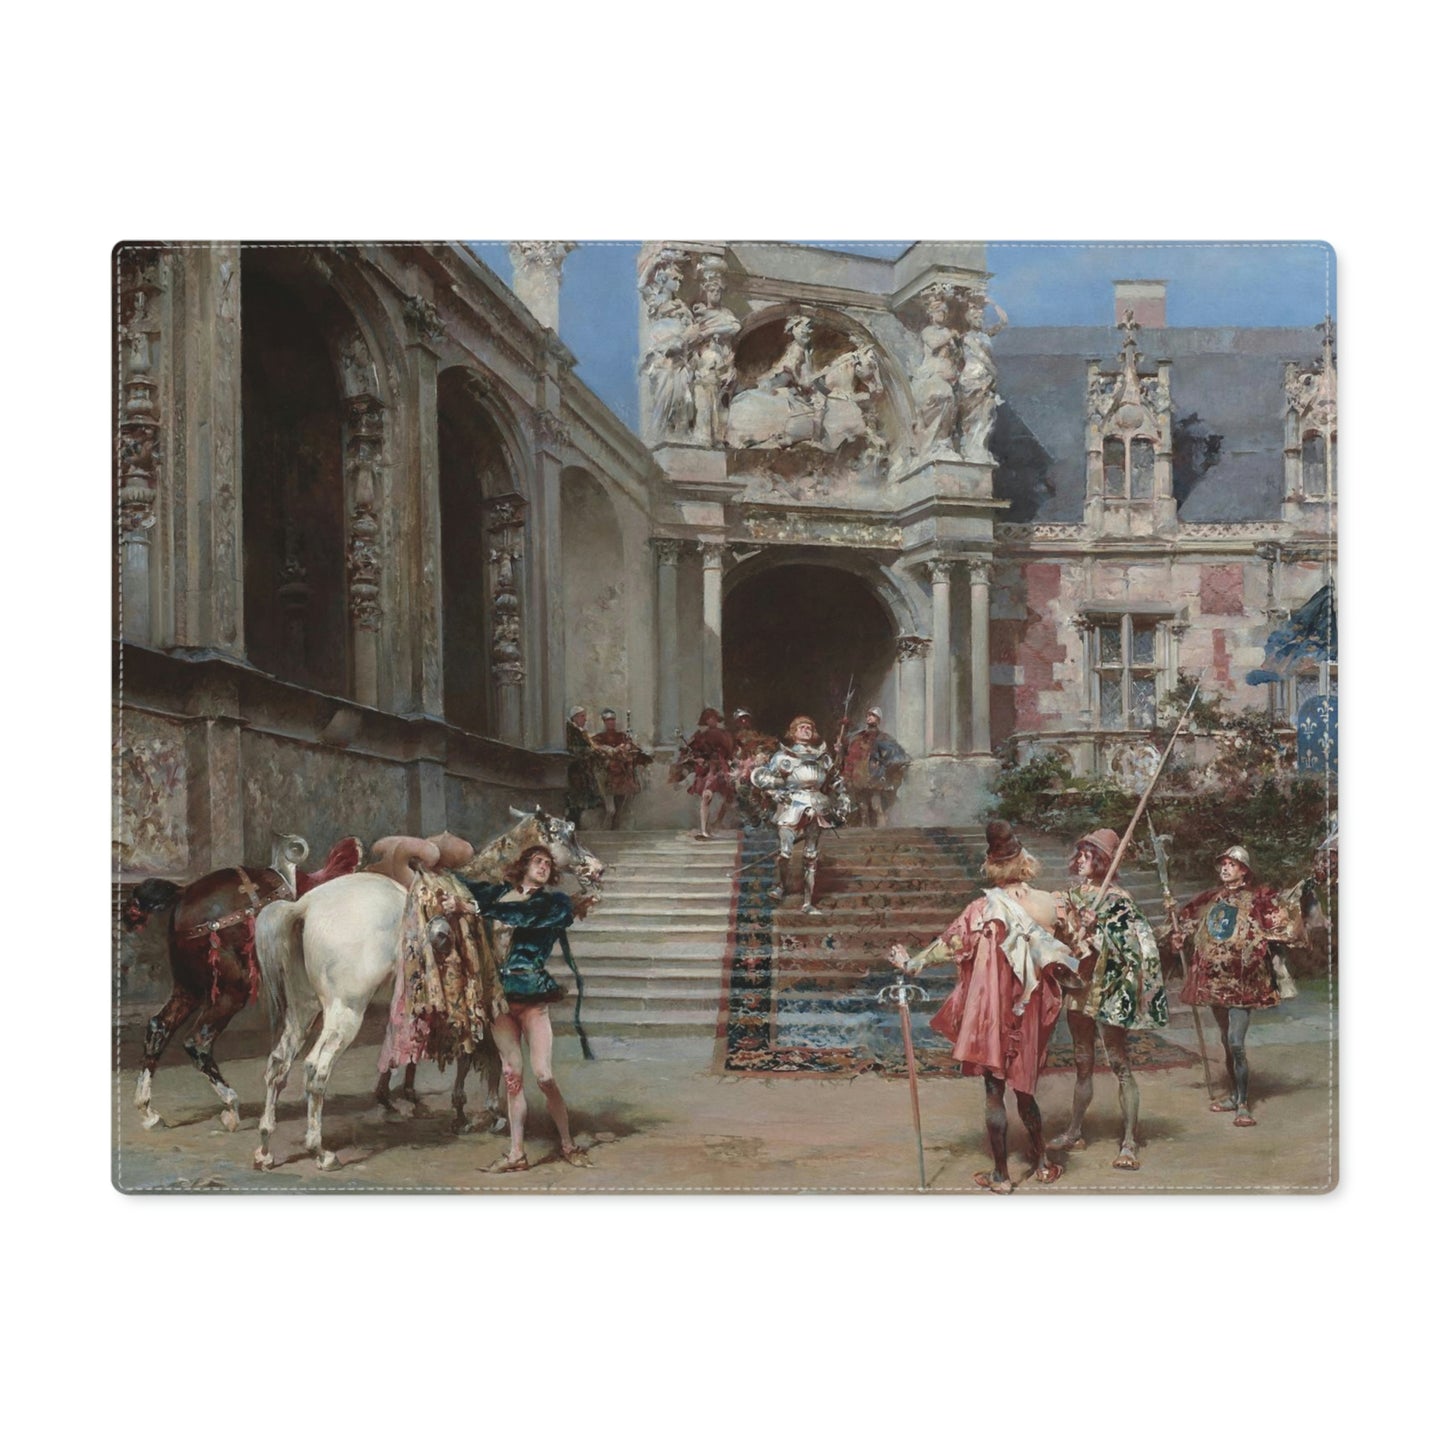 Ludovico Marchetti: "The Knight of Lily" - Placemat, 1pc